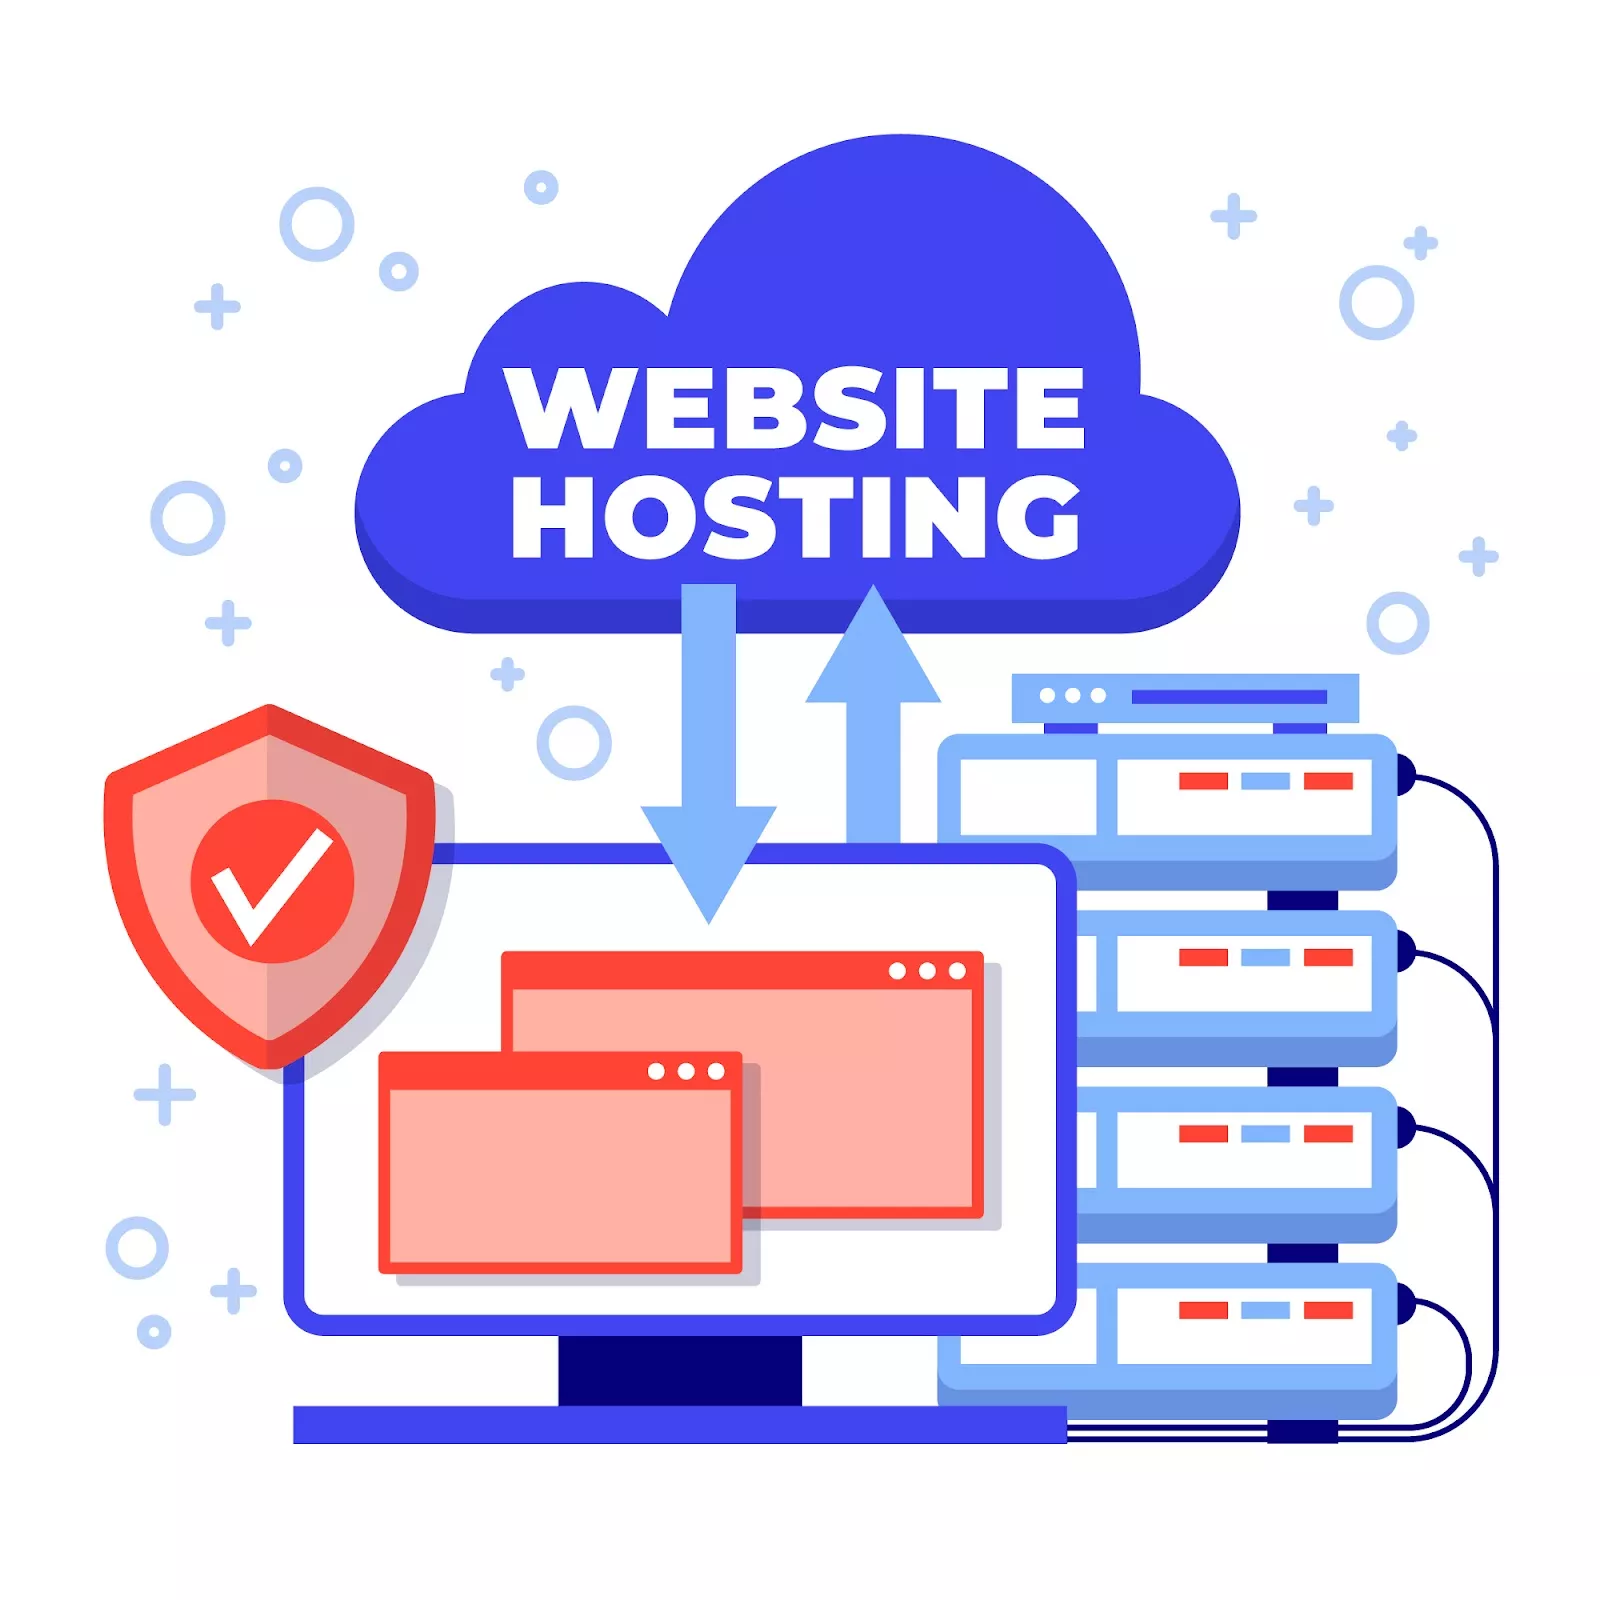 Selecting a hosting plan